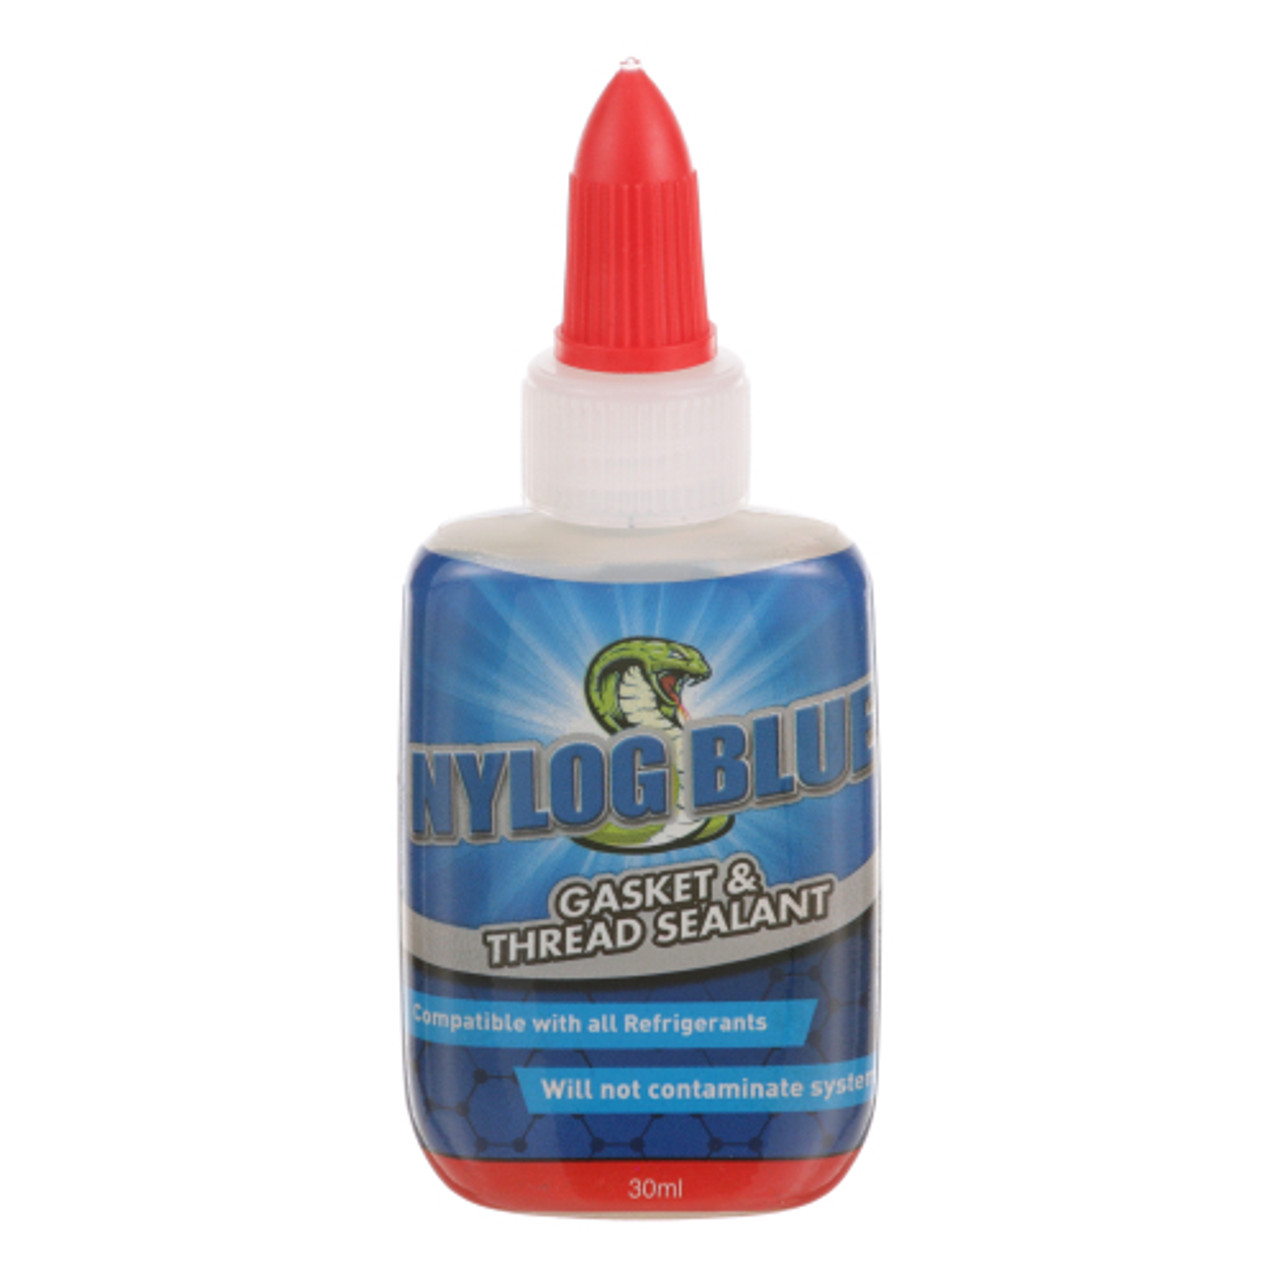 Gasket & Thread Sealant Nylog Blue 2/Pk - Replacement Part For Refrigeration Technologies RT201BP